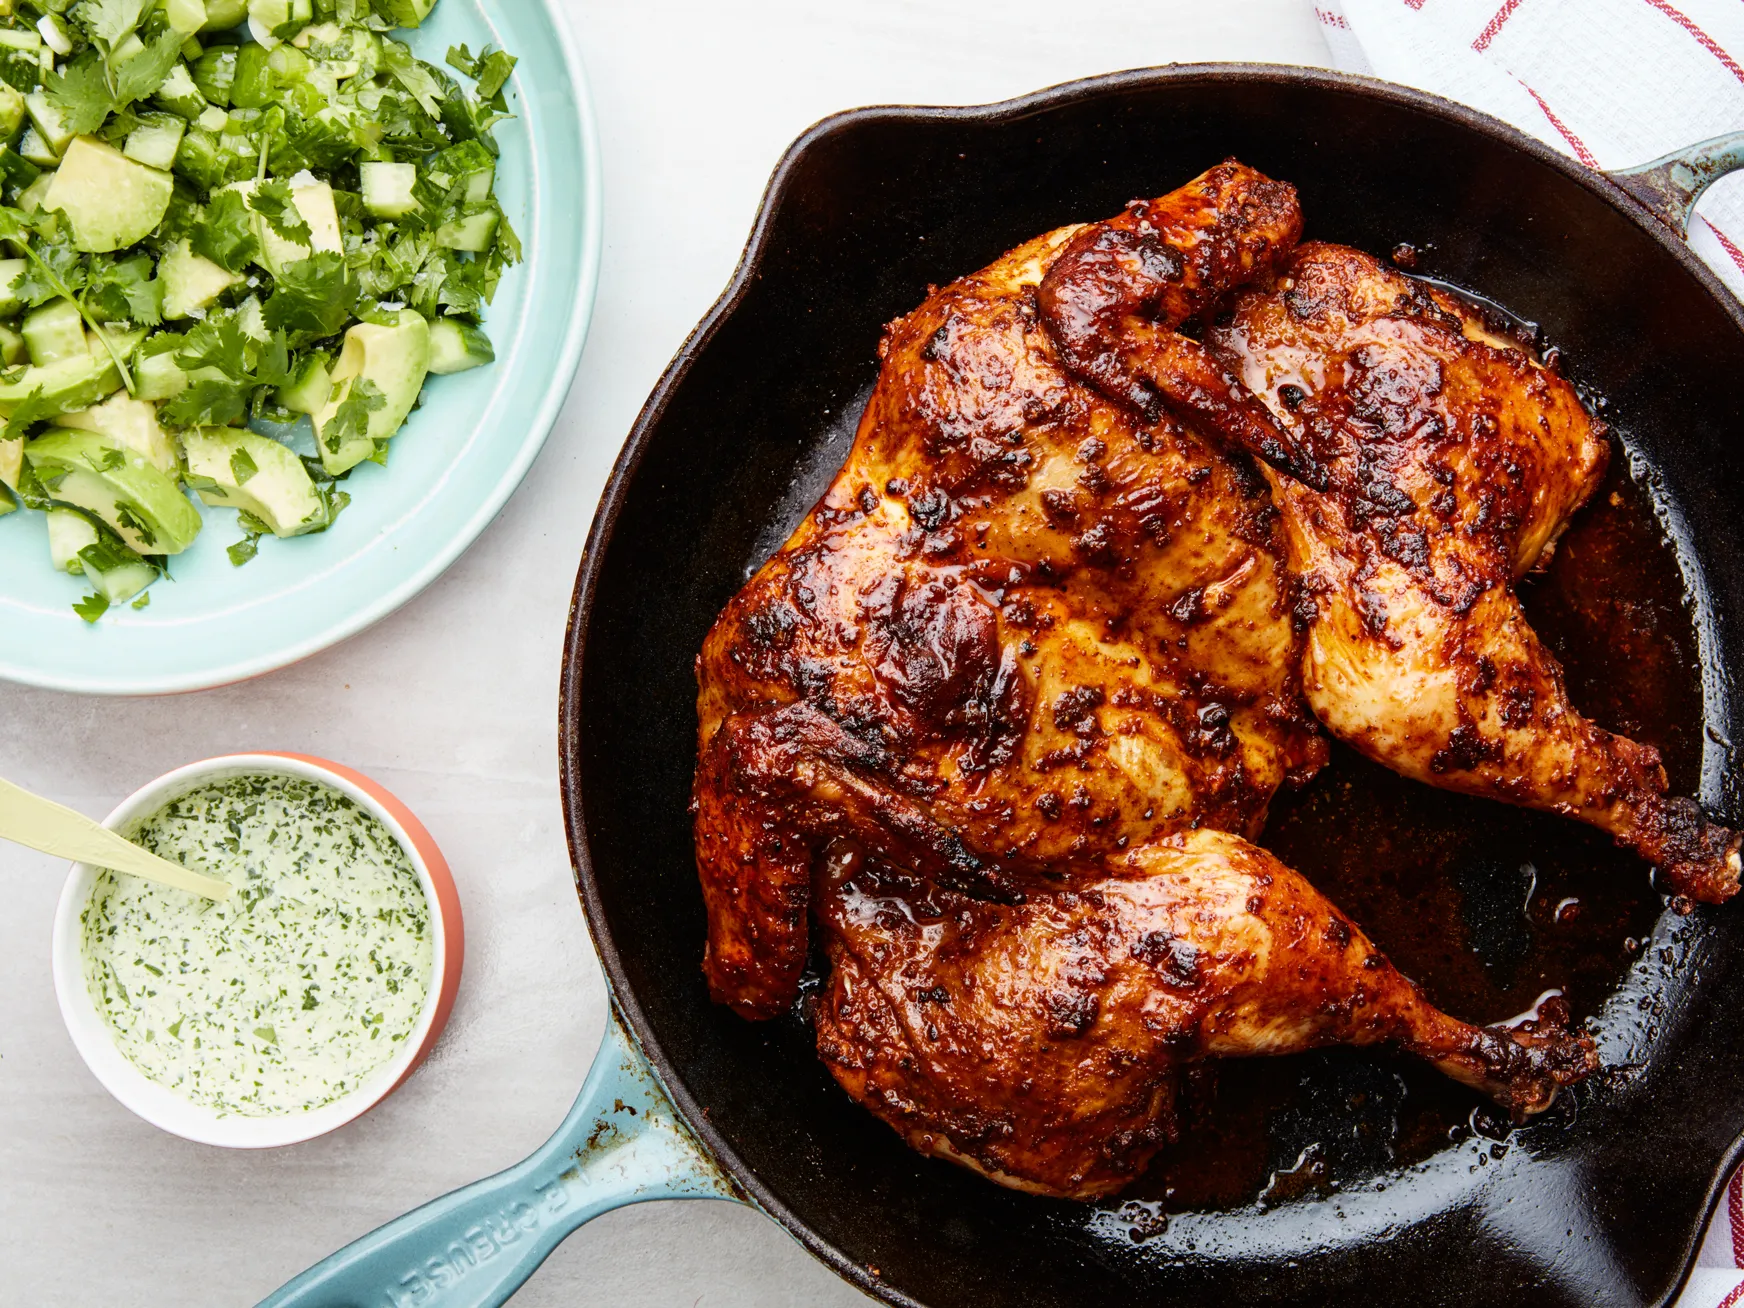 SIMPLE CHICKEN RECIPES IN 45 MINUTES